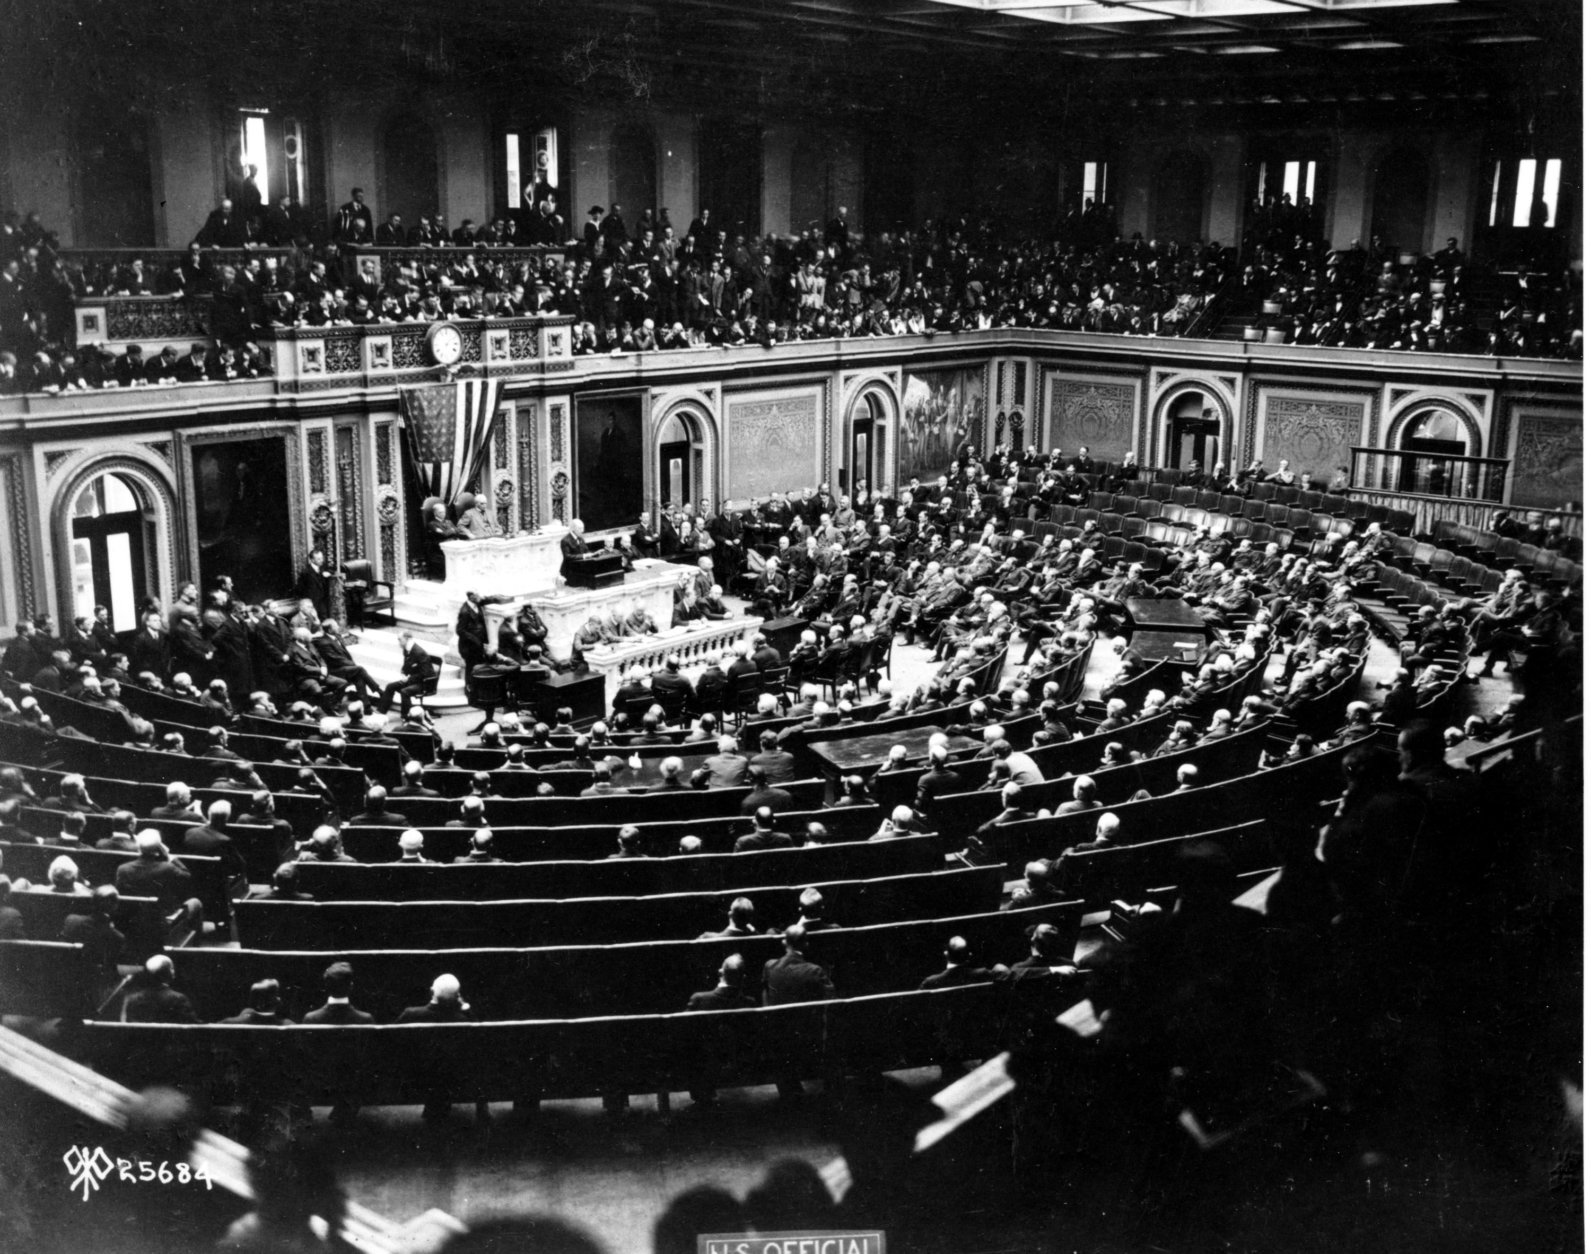 U.S. President Woodrow Wilson reads the terms of the German Armistice to Congress in Joint session, and announces the end of World War I, in Washington, D.C., on Nov. 11, 1918. The peace plans proposals are outlined in the 'fourteen points.' (AP Photo)